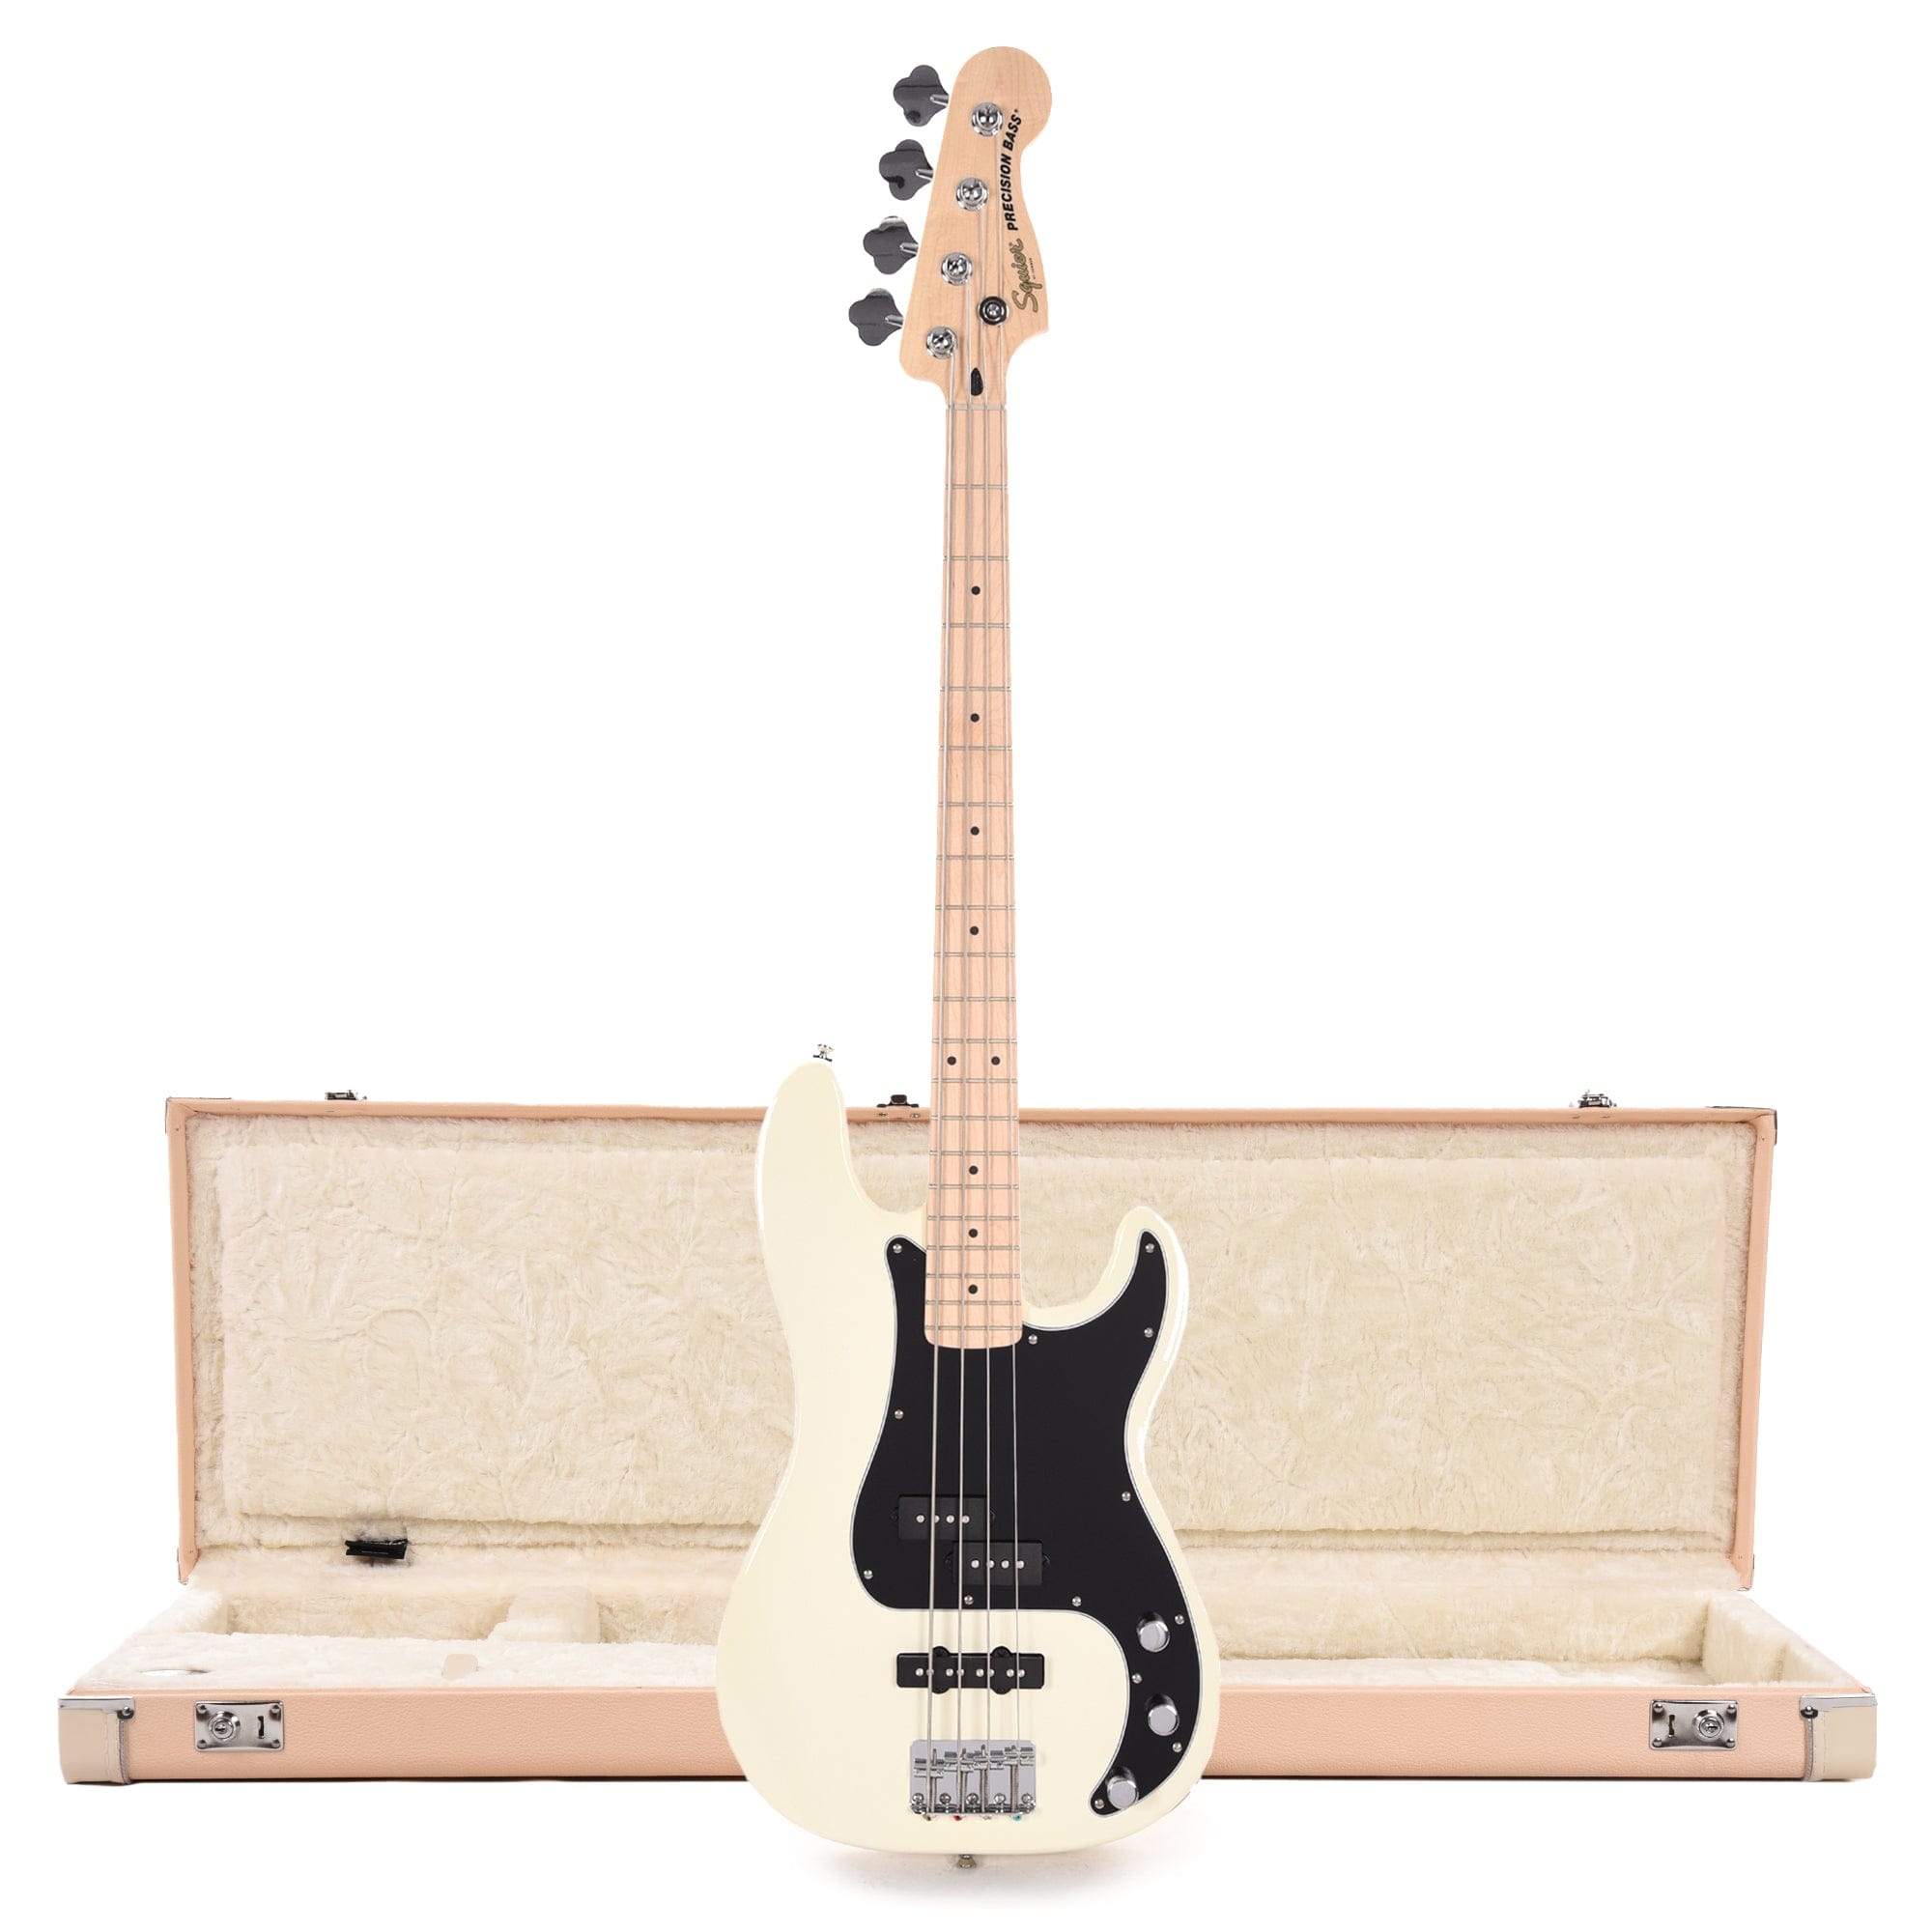 Squier Affinity Precision Bass PJ MN Olympic White and Hardshell Case Jazz Bass/Precision Bass Shell Pink w/Cream Interior (CME Exclusive) Bass Guitars / 4-String